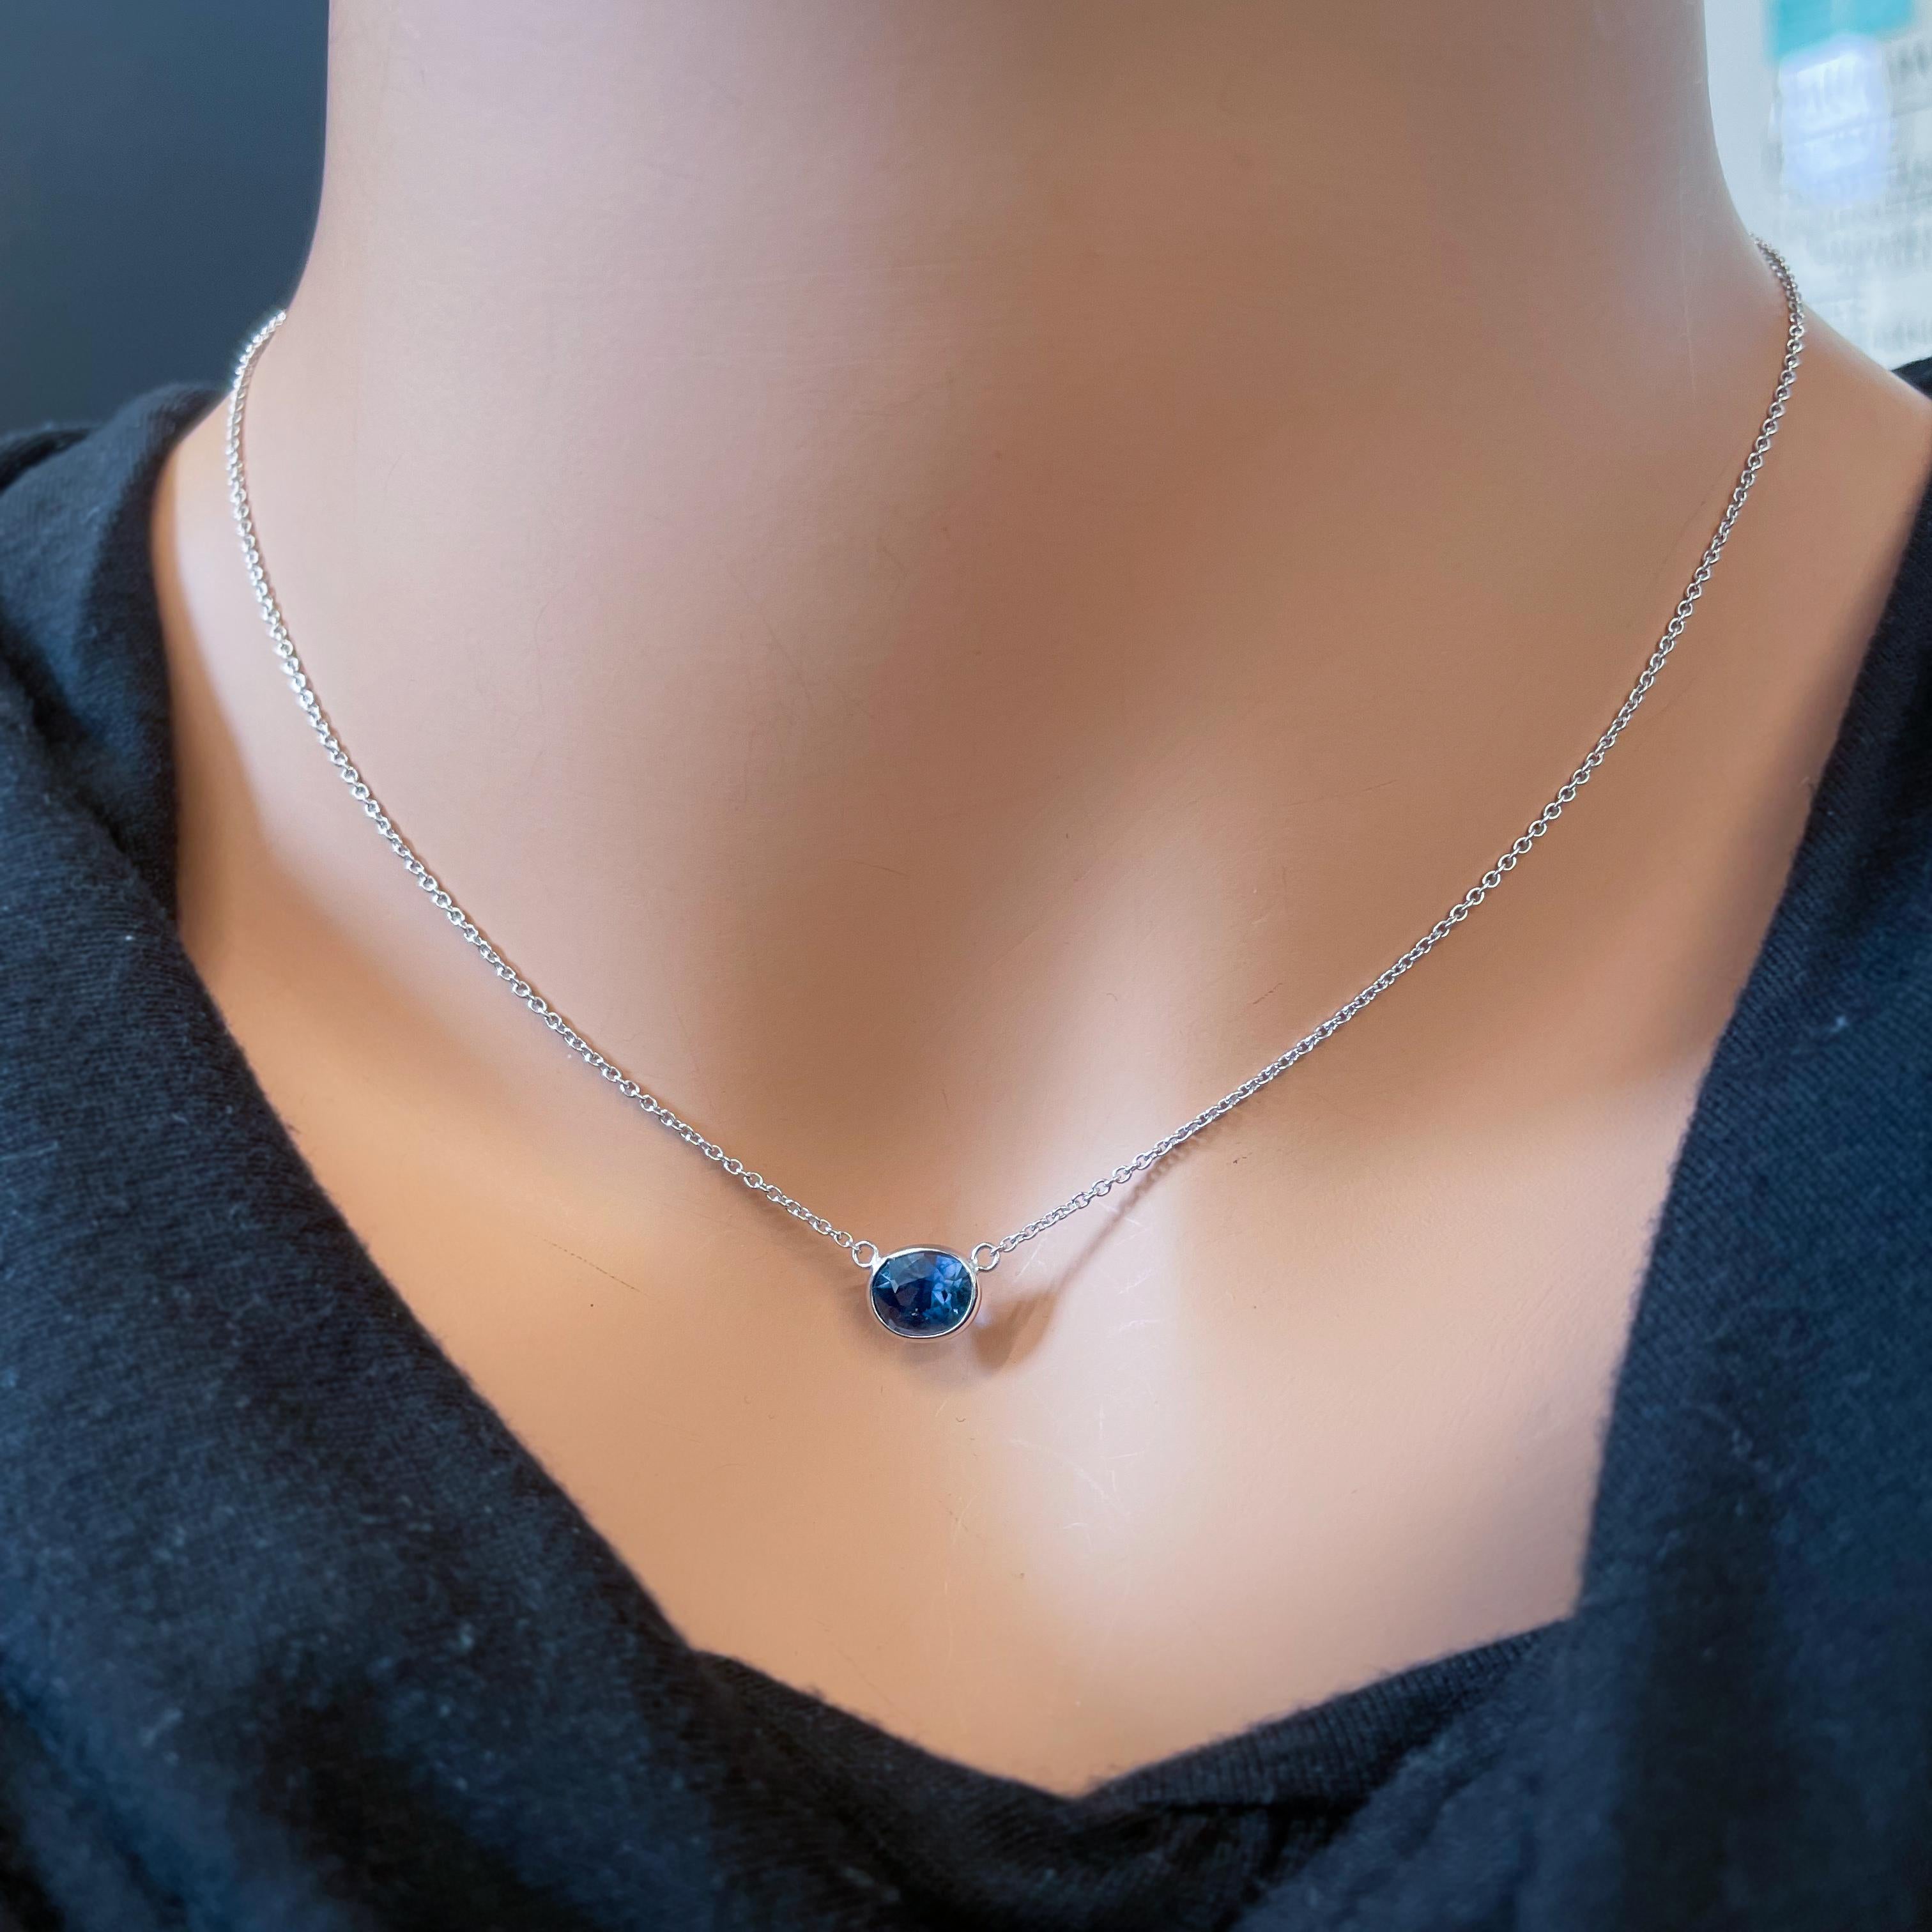 This necklace features an oval-cut blue sapphire with a weight of 1.99 carats, set in 14k white gold (WG). Blue sapphires are well-known for their rich and vibrant blue color, and the oval cut is a classic choice for gemstones, offering a timeless